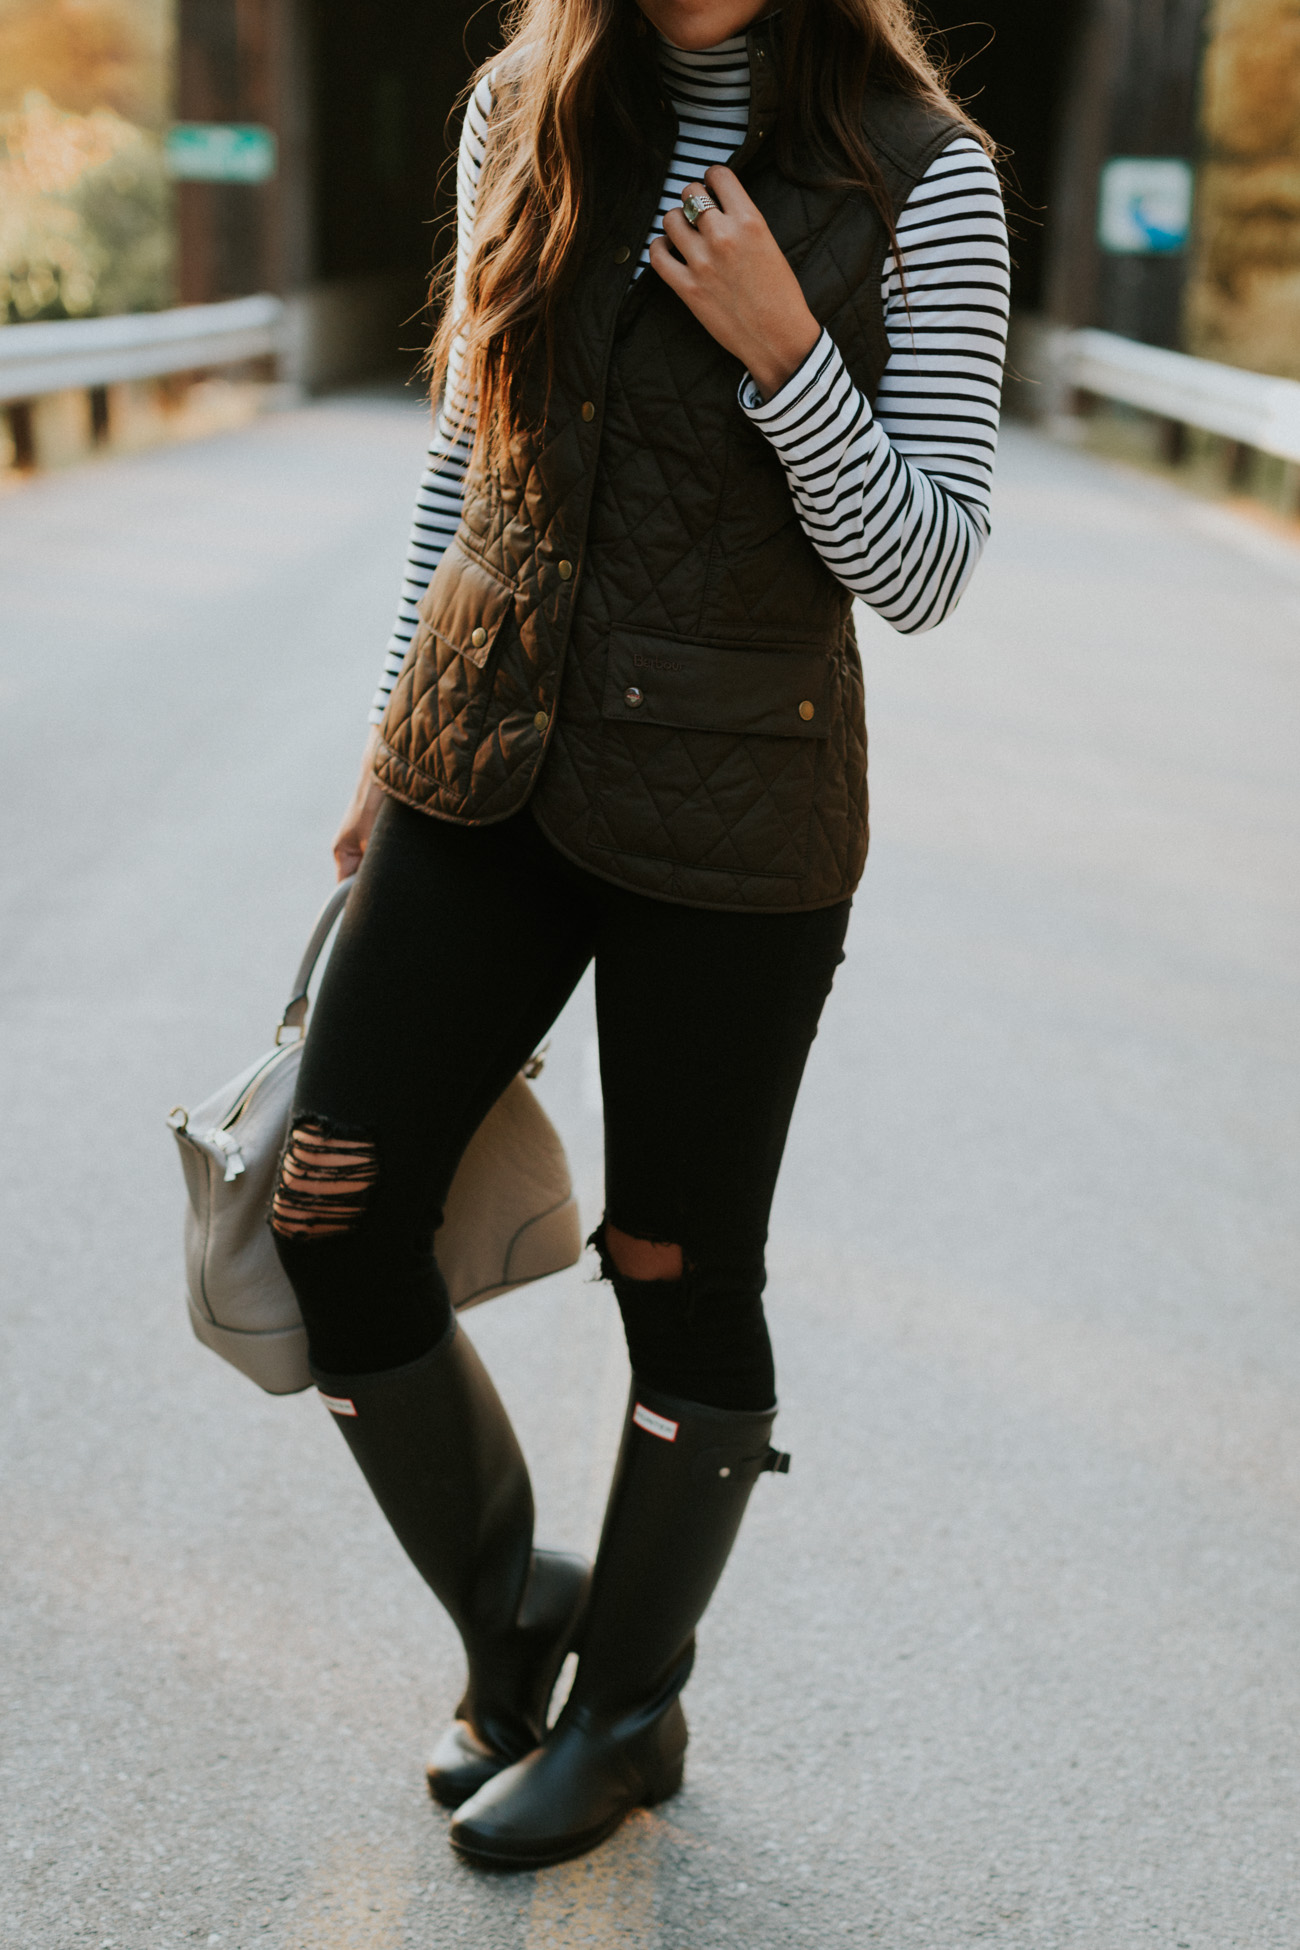 barbour quilted vest, hunter boots, hunter rain boots, hunter wellies, tory burch purse, fall style, stripe turtleneck, new hampshire foliage, vermont foliage, fall outfit ideas, fall outfits, fall fashion // grace wainwright a southern drawl